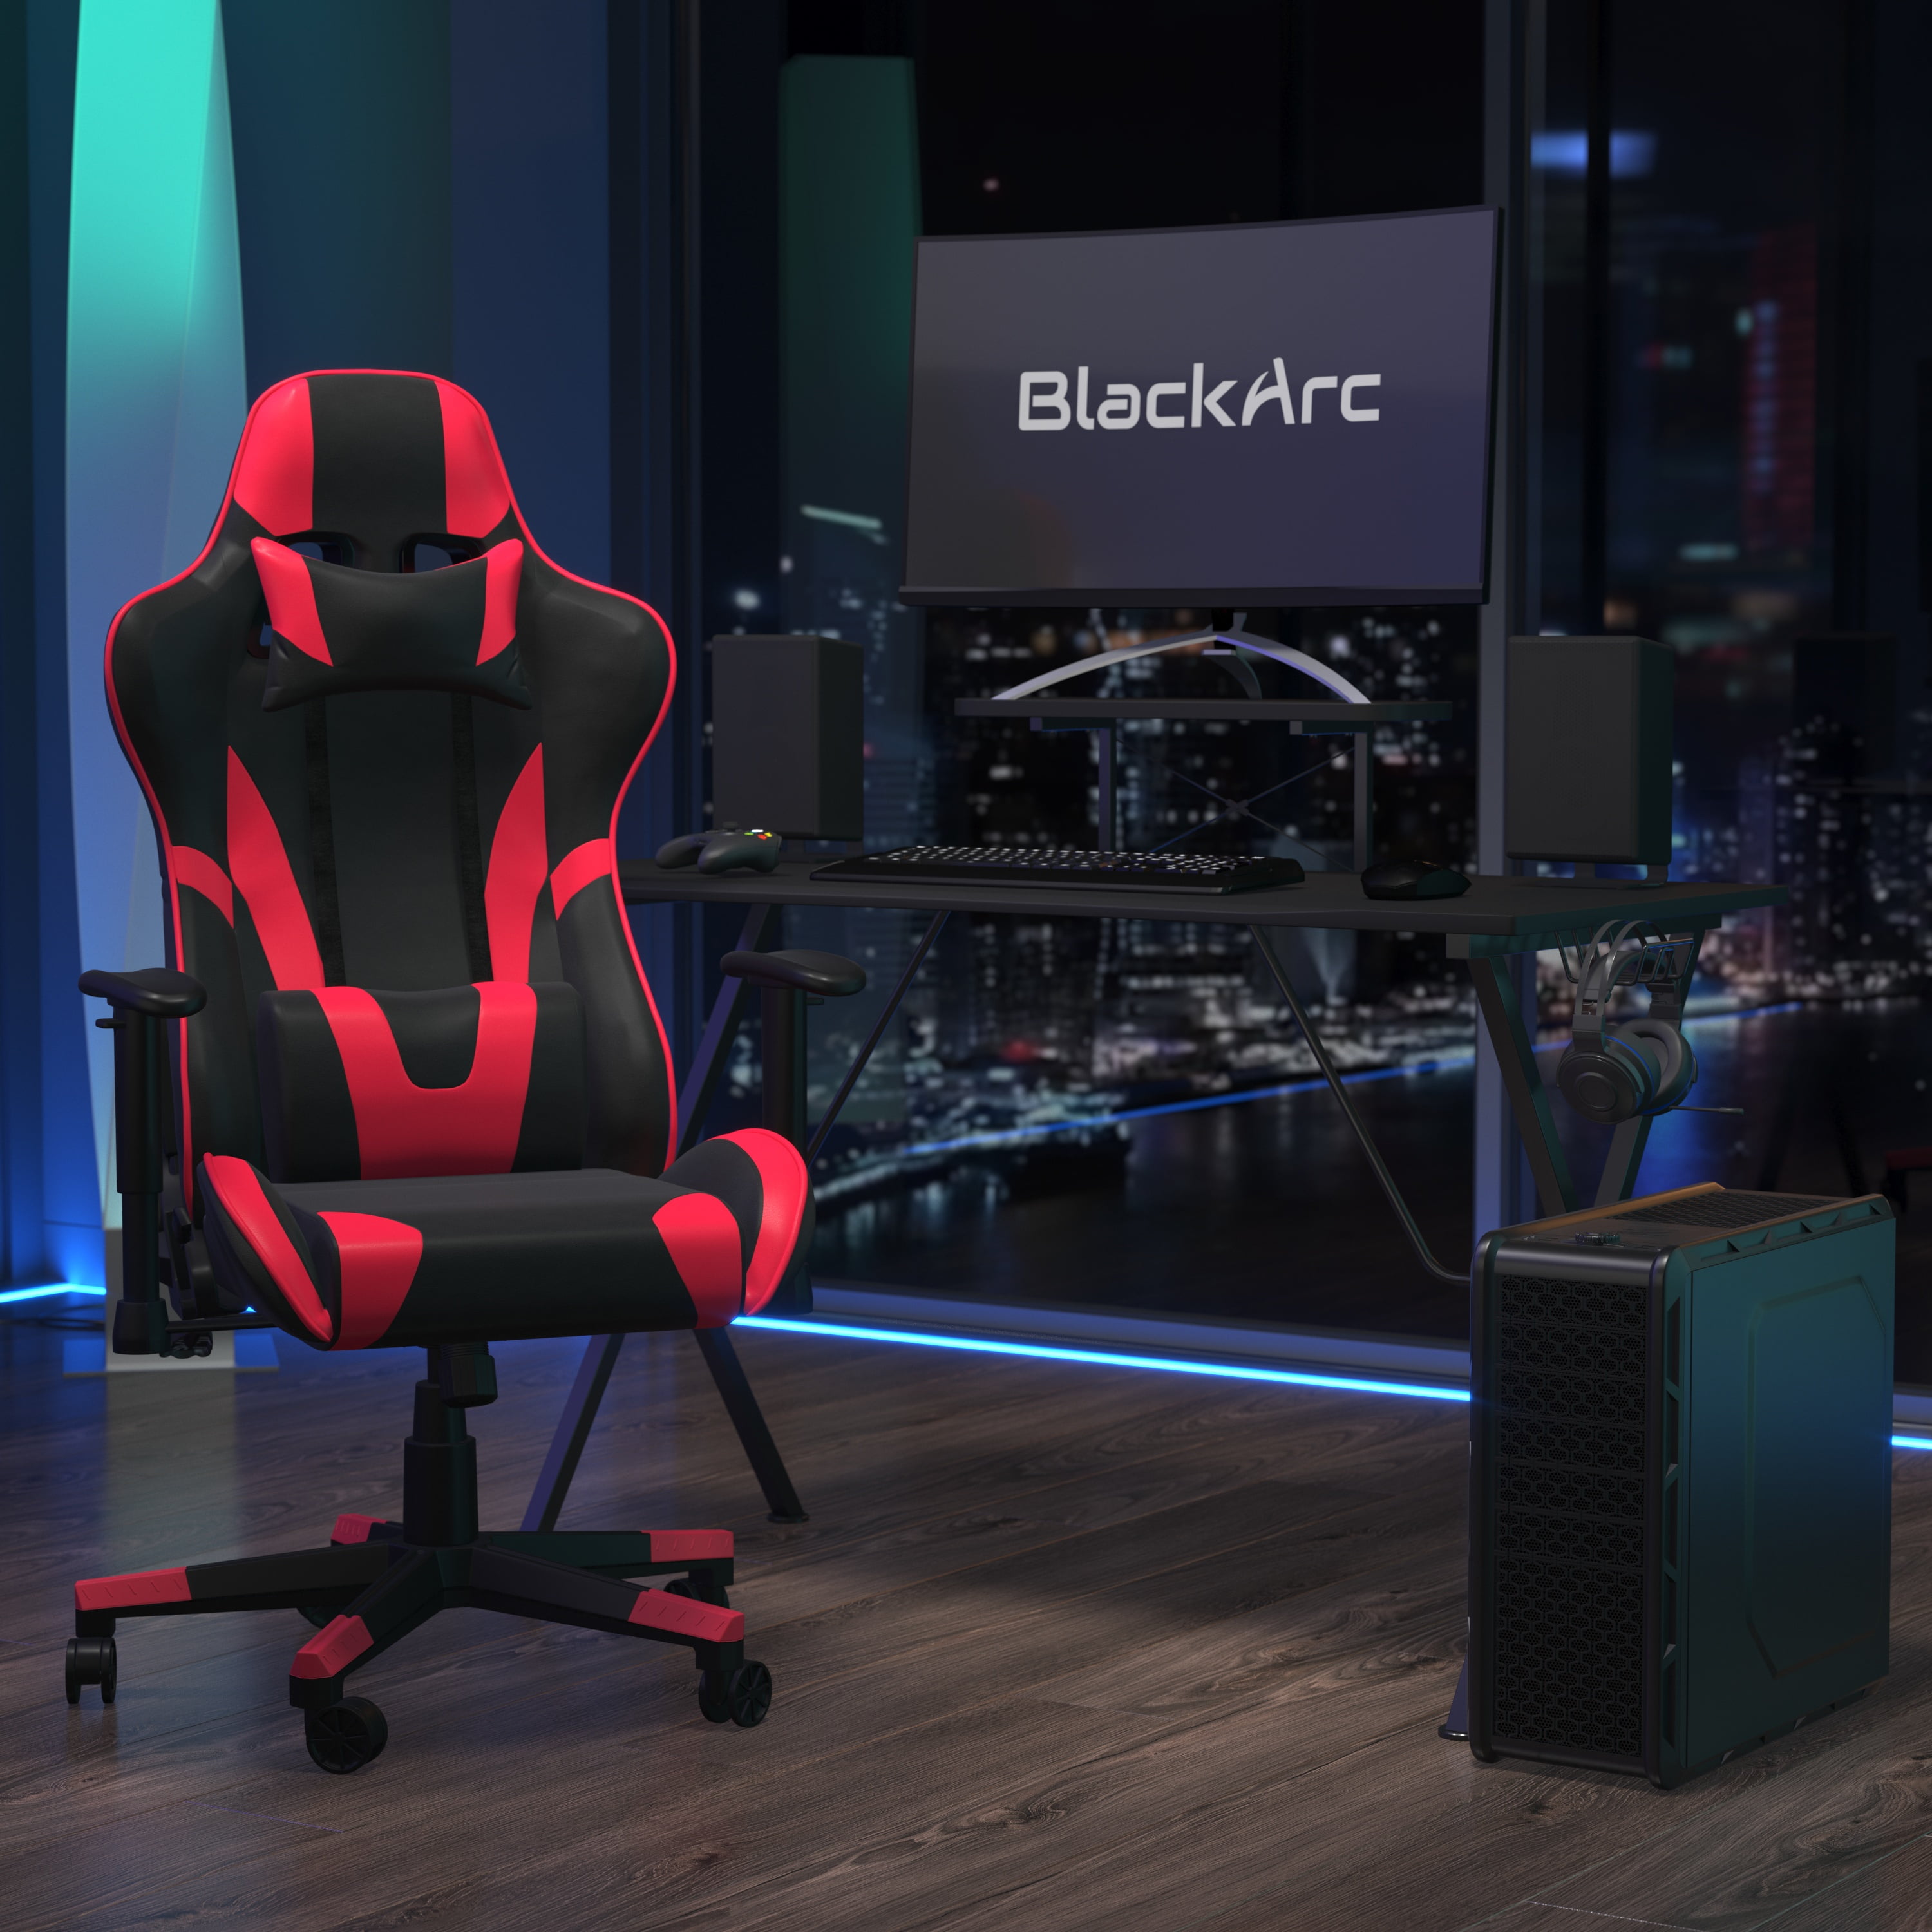 BlackArc Delta Gaming Setup: Reclining Chair with Lumbar Support &  Headrest; Desk with Detachable Headphone Hook/Cupholder & Monitor Stand